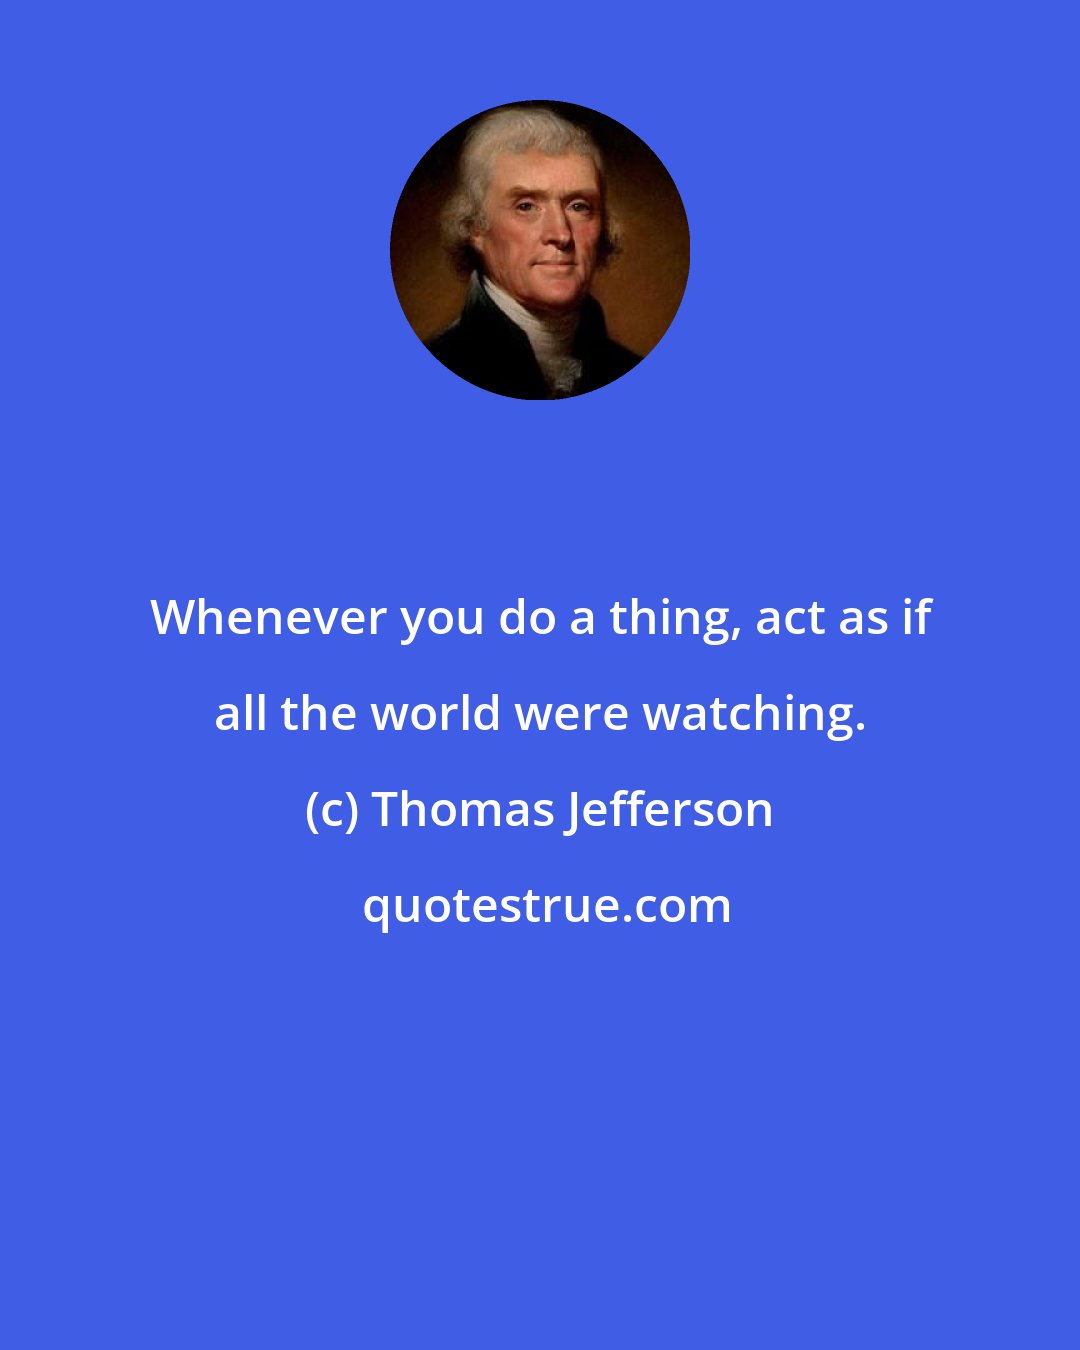 Thomas Jefferson: Whenever you do a thing, act as if all the world were watching.